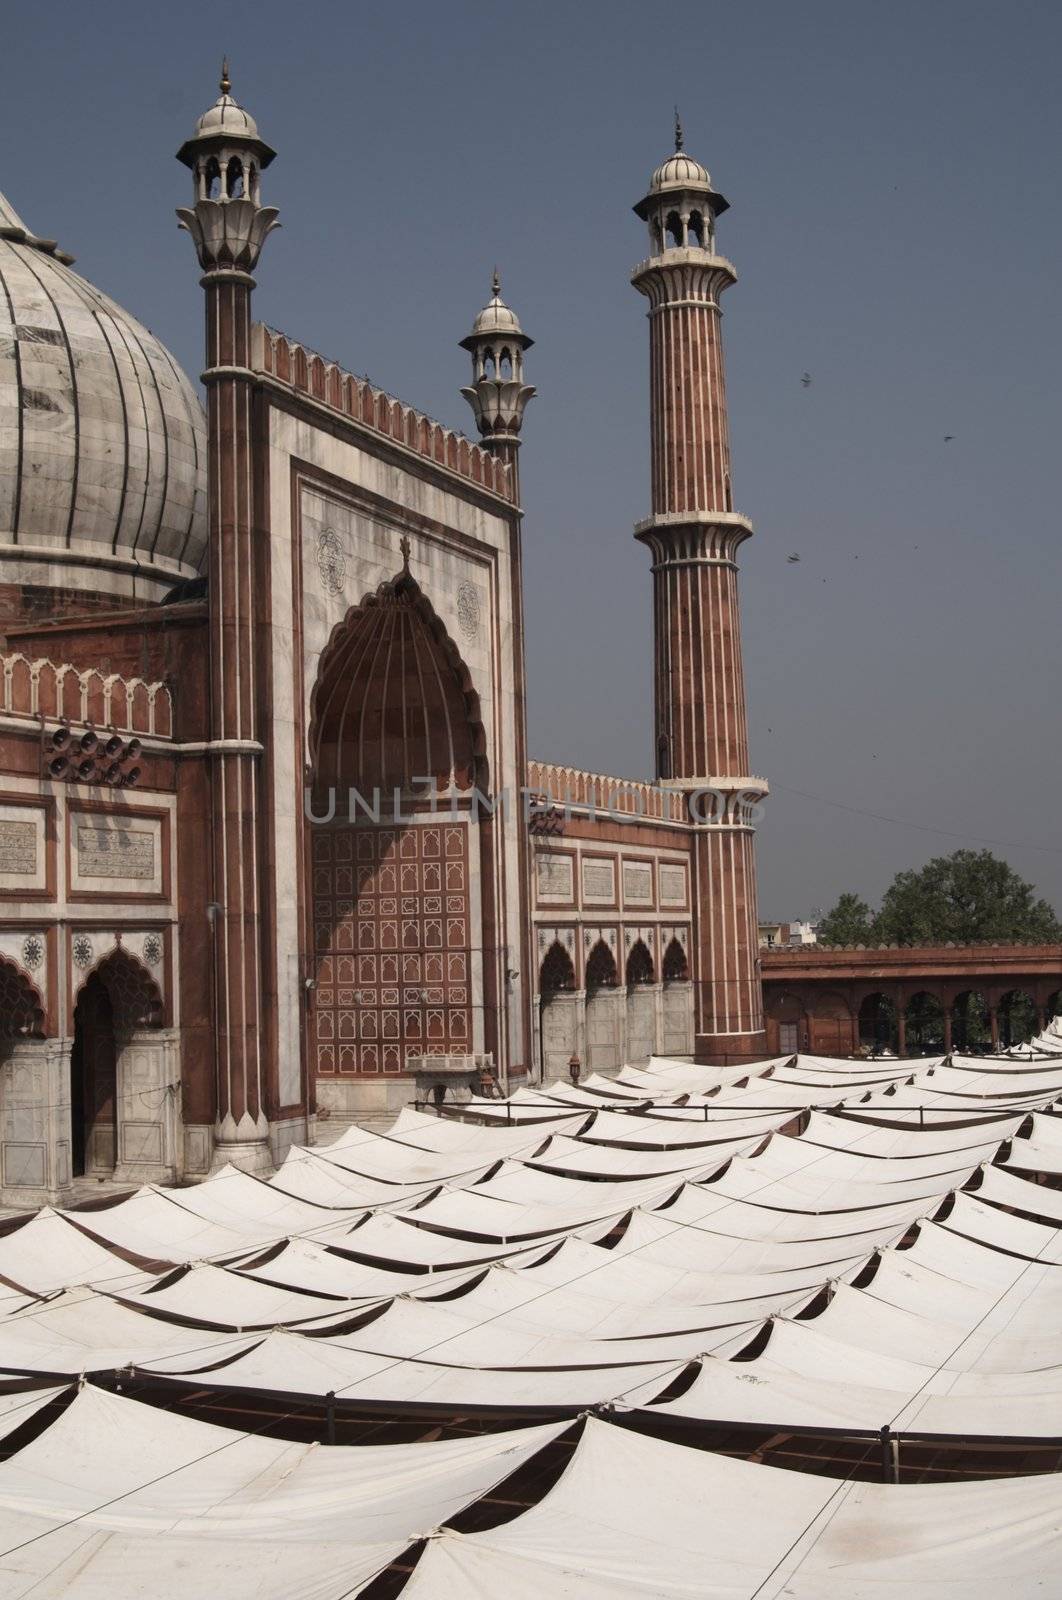 Awnings in the courtyard of the Friday Mosque (Jama Masjid) to shelter worshippers from the sun. Old Delhi, India.